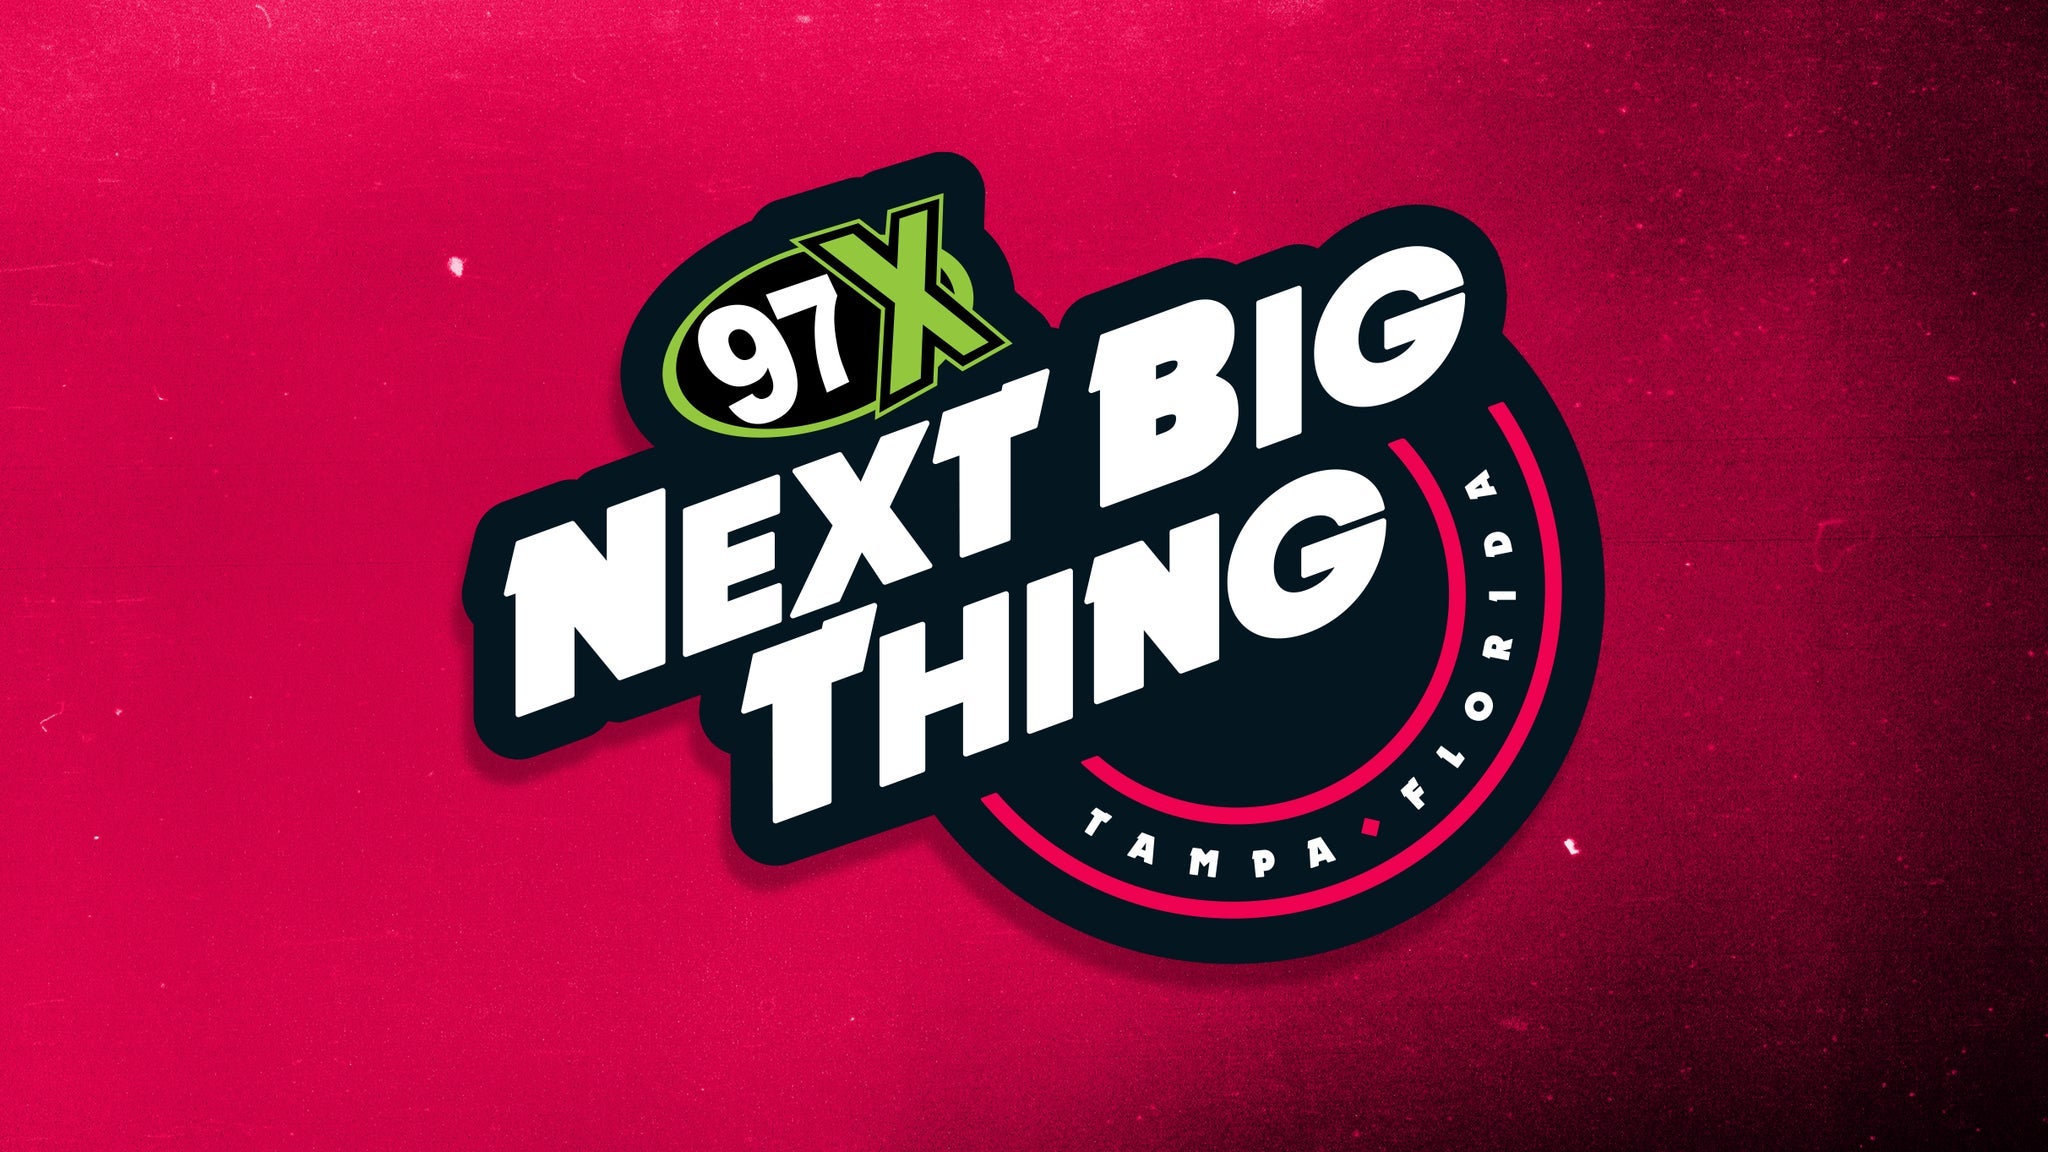 97x Next Big Thing VIP Experience Day 2 (Sunday) tickets, presale